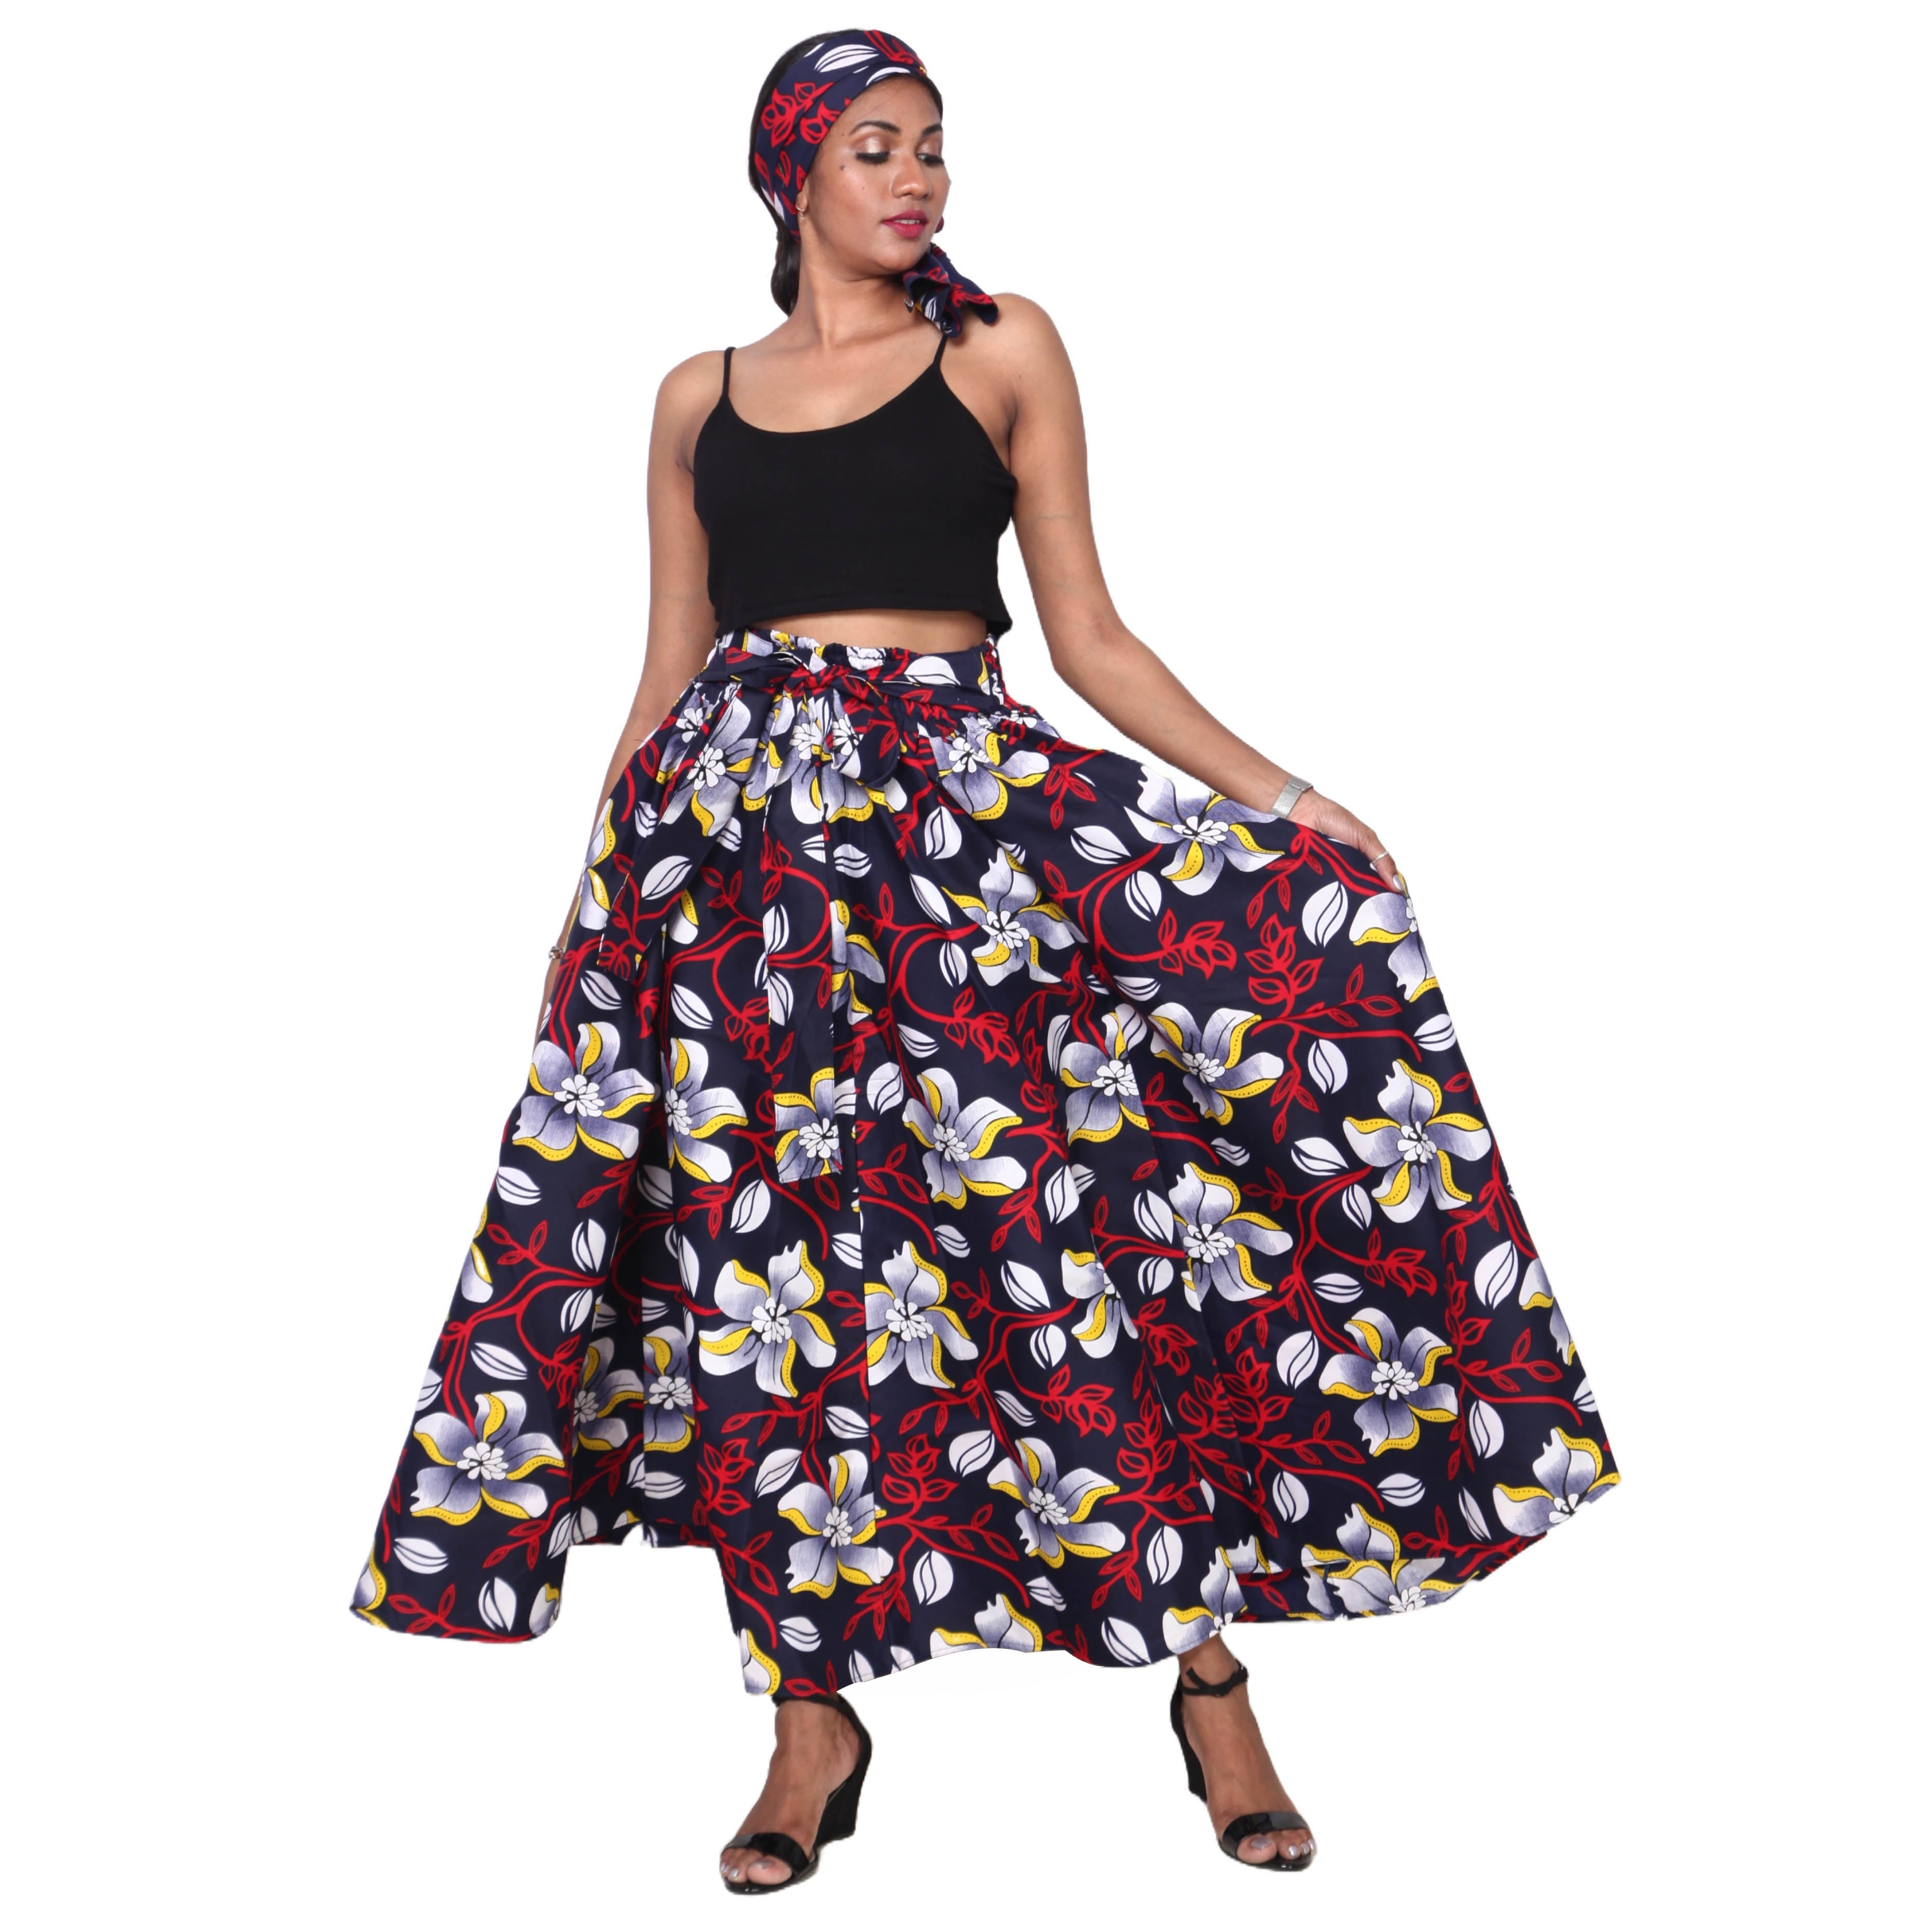 Women's Poly-Cotton Maxi Skirt with Tie Waist red/black contrast